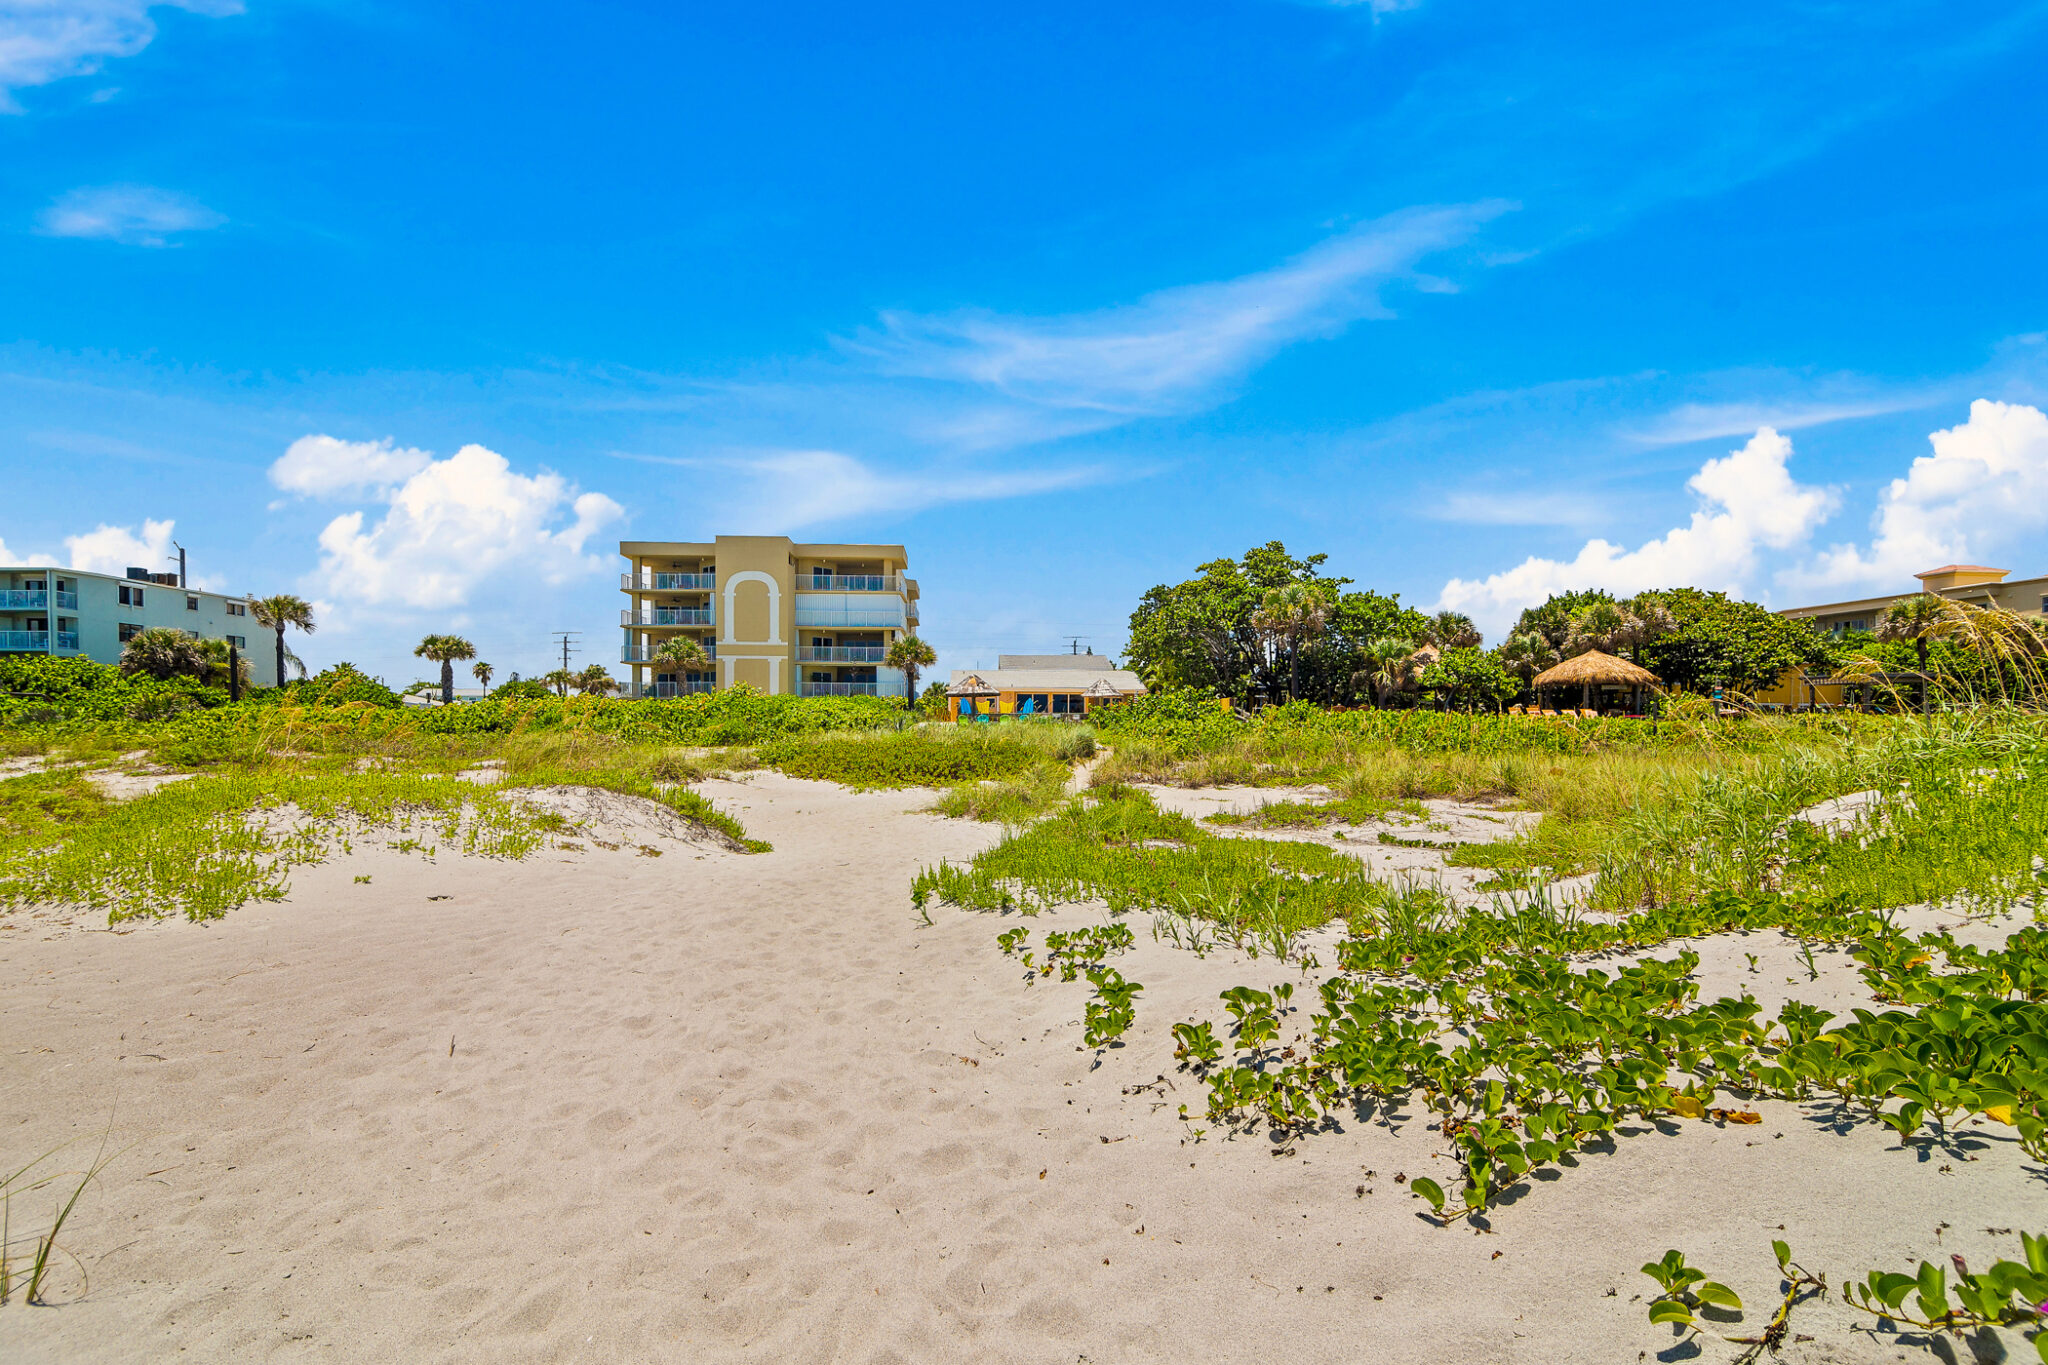 Sandy beach with vegetation and rear view of Coco Sands cottages